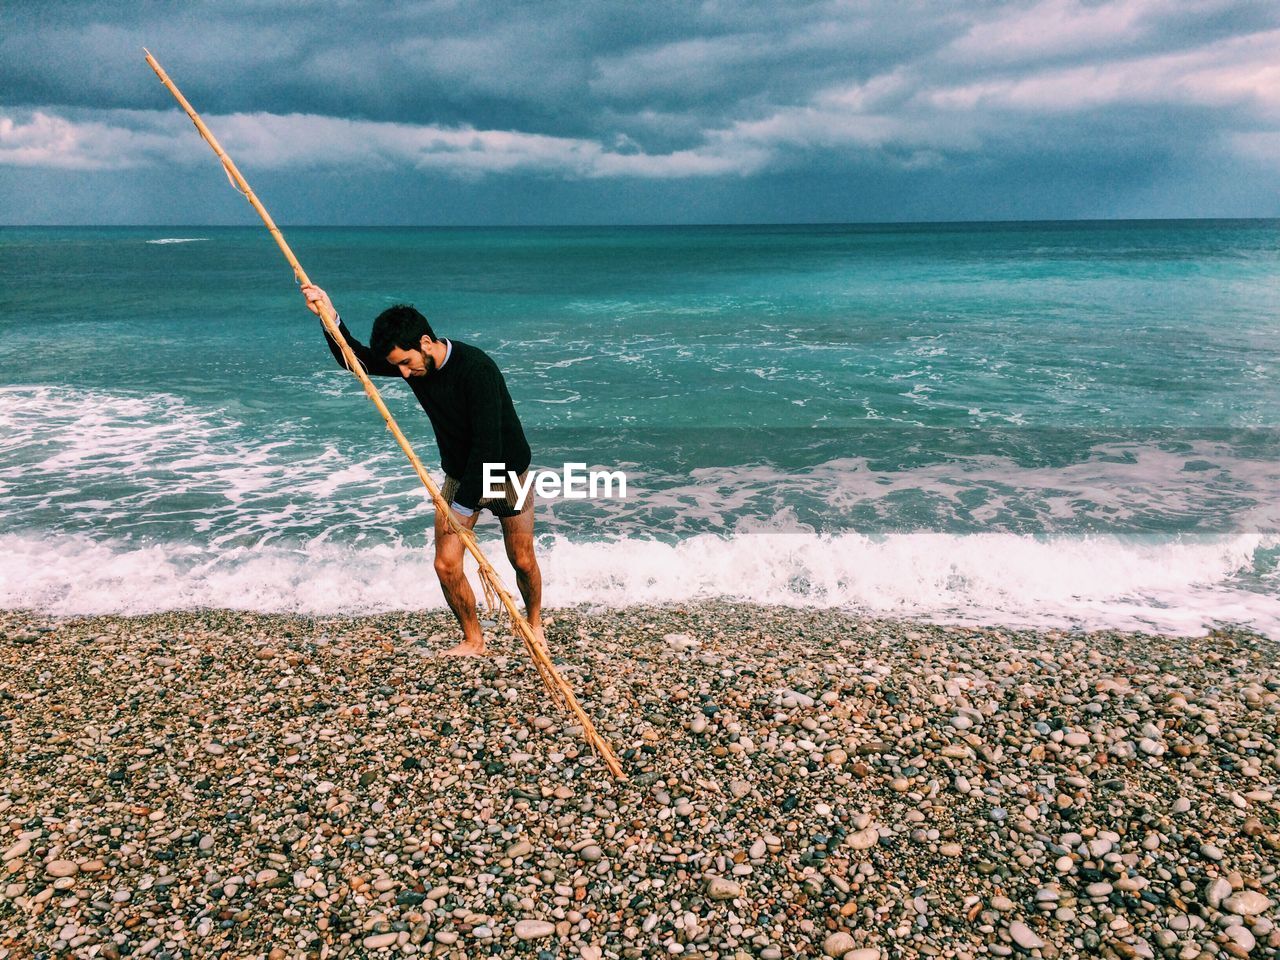 Fisherman with pole on seashore against cloudy sky